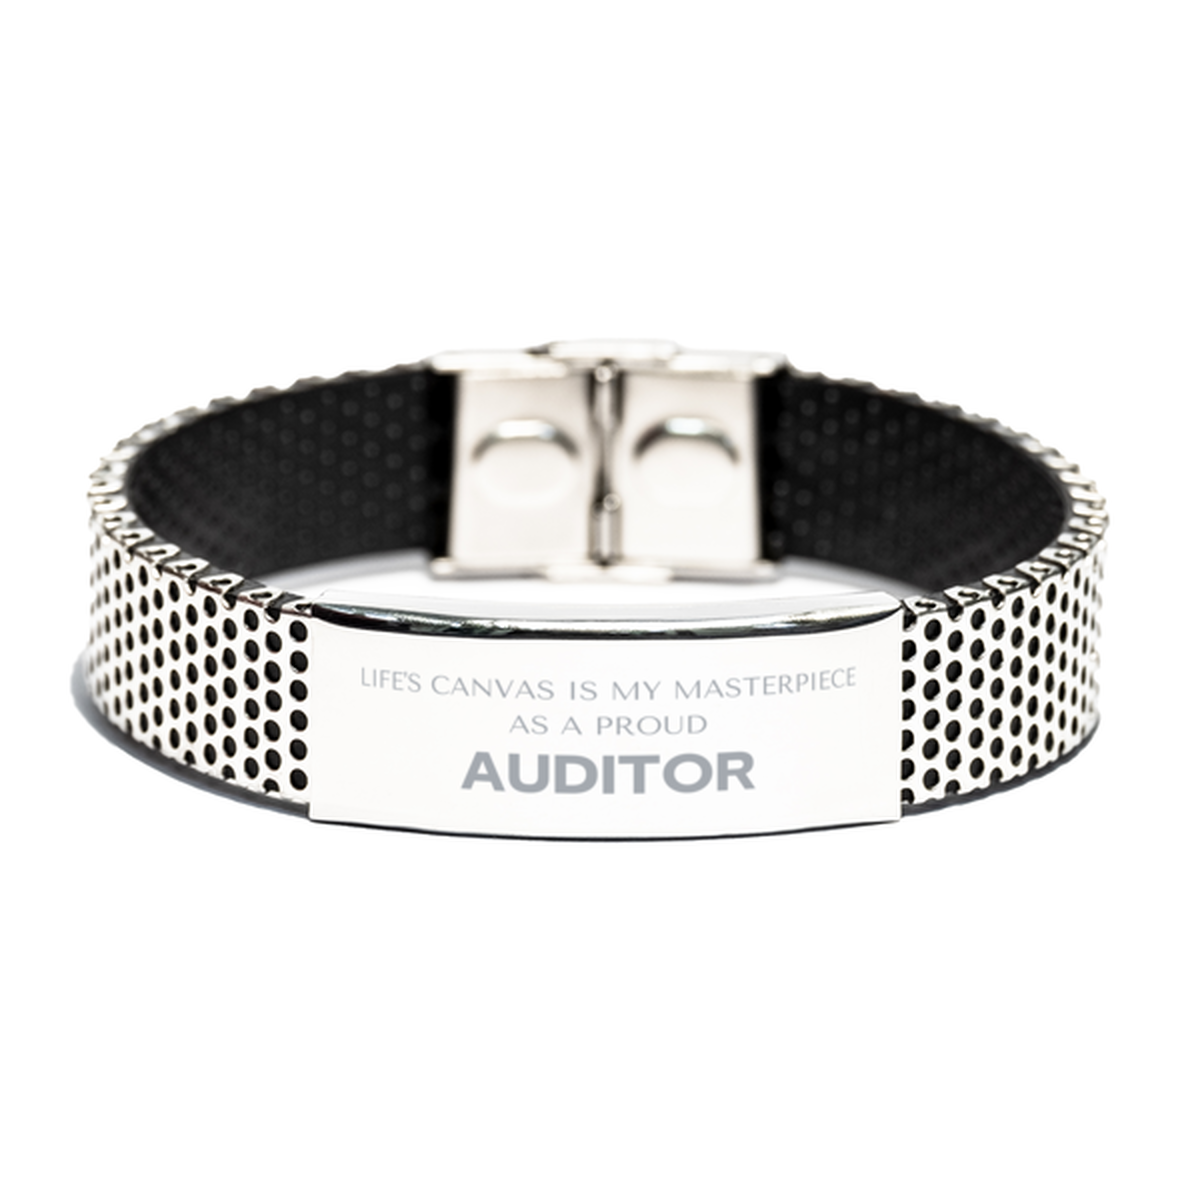 Proud Auditor Gifts, Life's canvas is my masterpiece, Epic Birthday Christmas Unique Stainless Steel Bracelet For Auditor, Coworkers, Men, Women, Friends